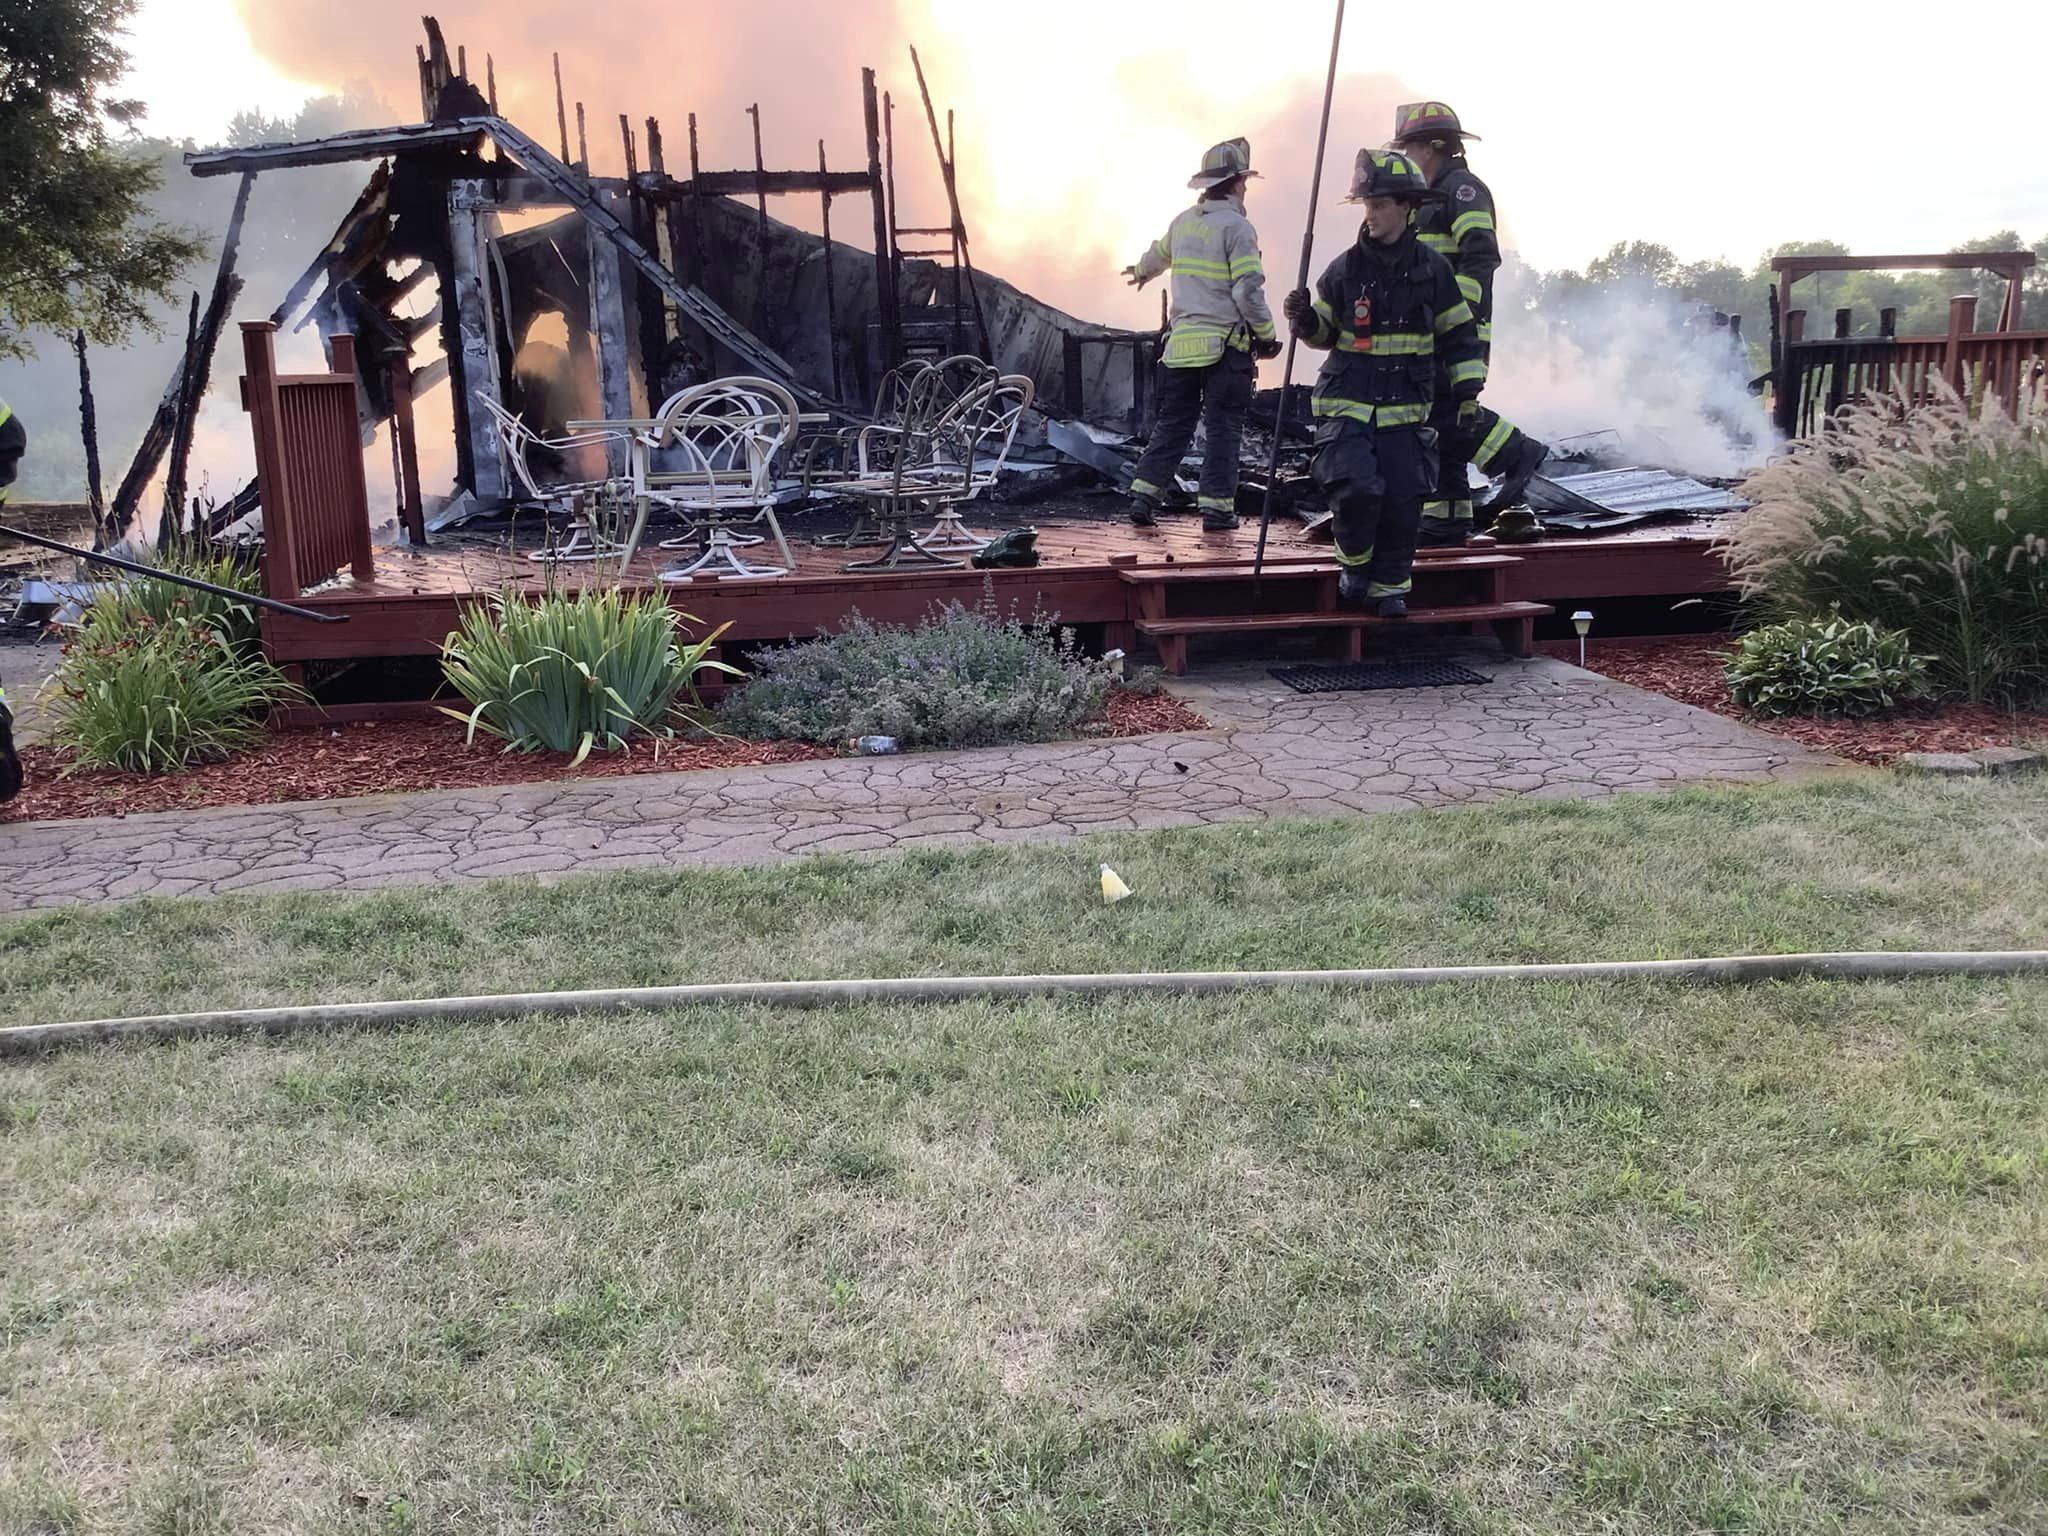 Mobile home a total loss after catching on fire in Fairbury